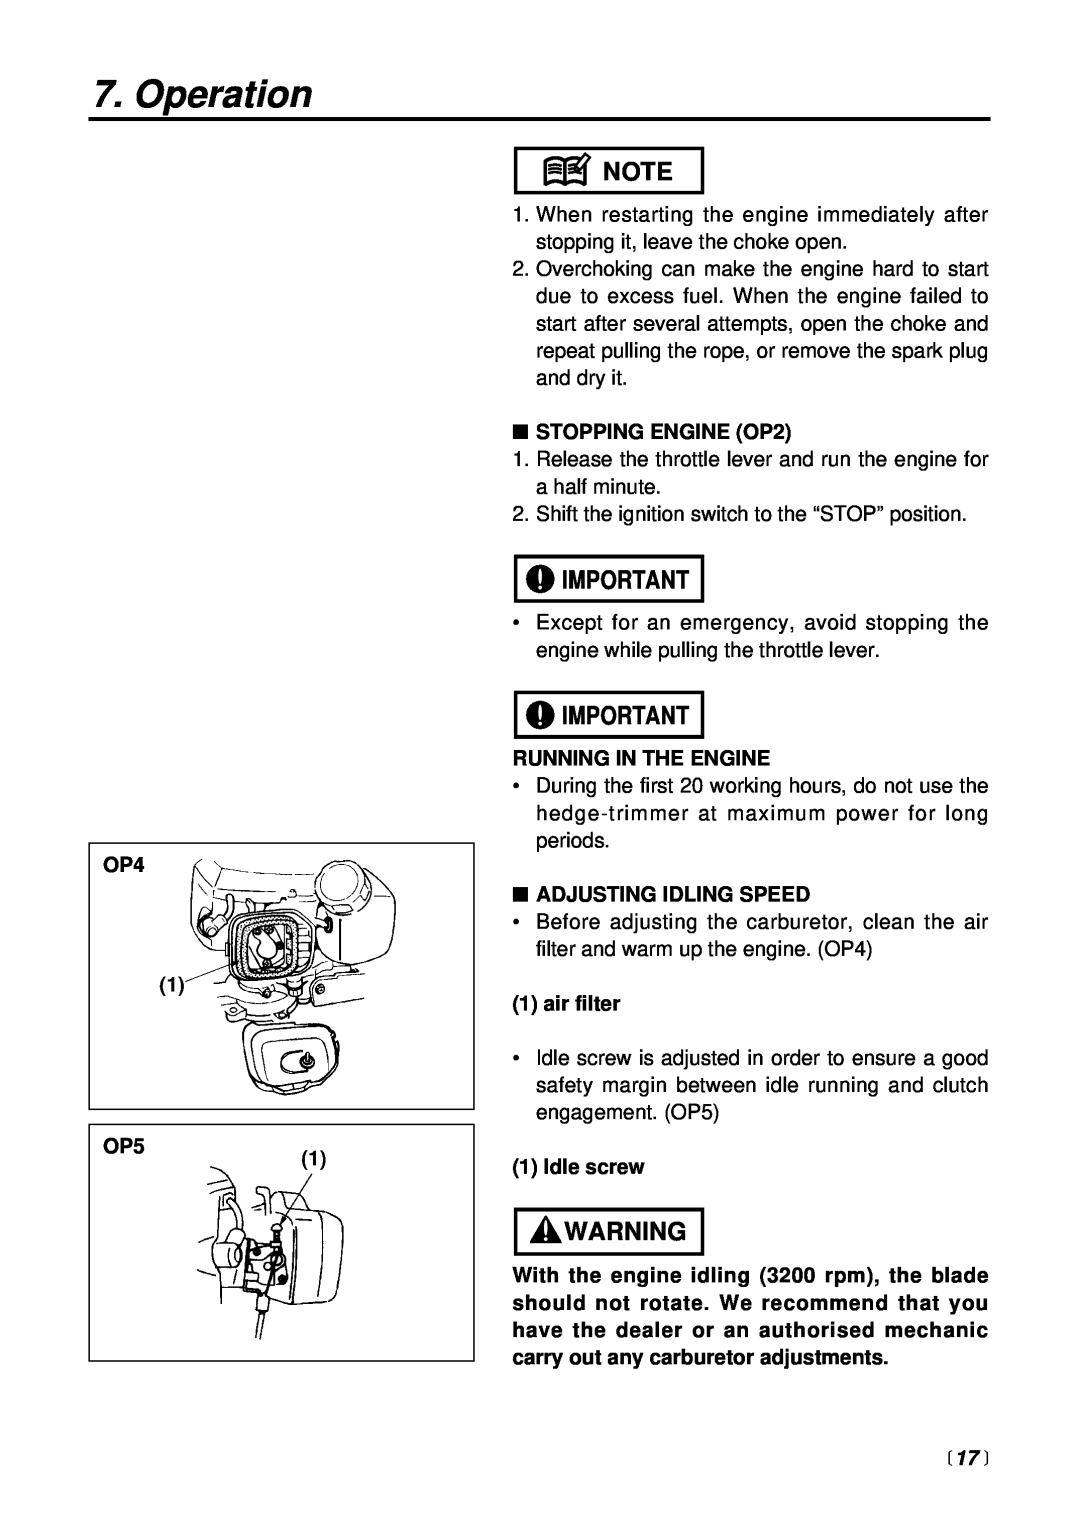 RedMax CHT2301  17 , Operation, OP4 OP5, STOPPING ENGINE OP2, Running In The Engine, Adjusting Idling Speed, air filter 